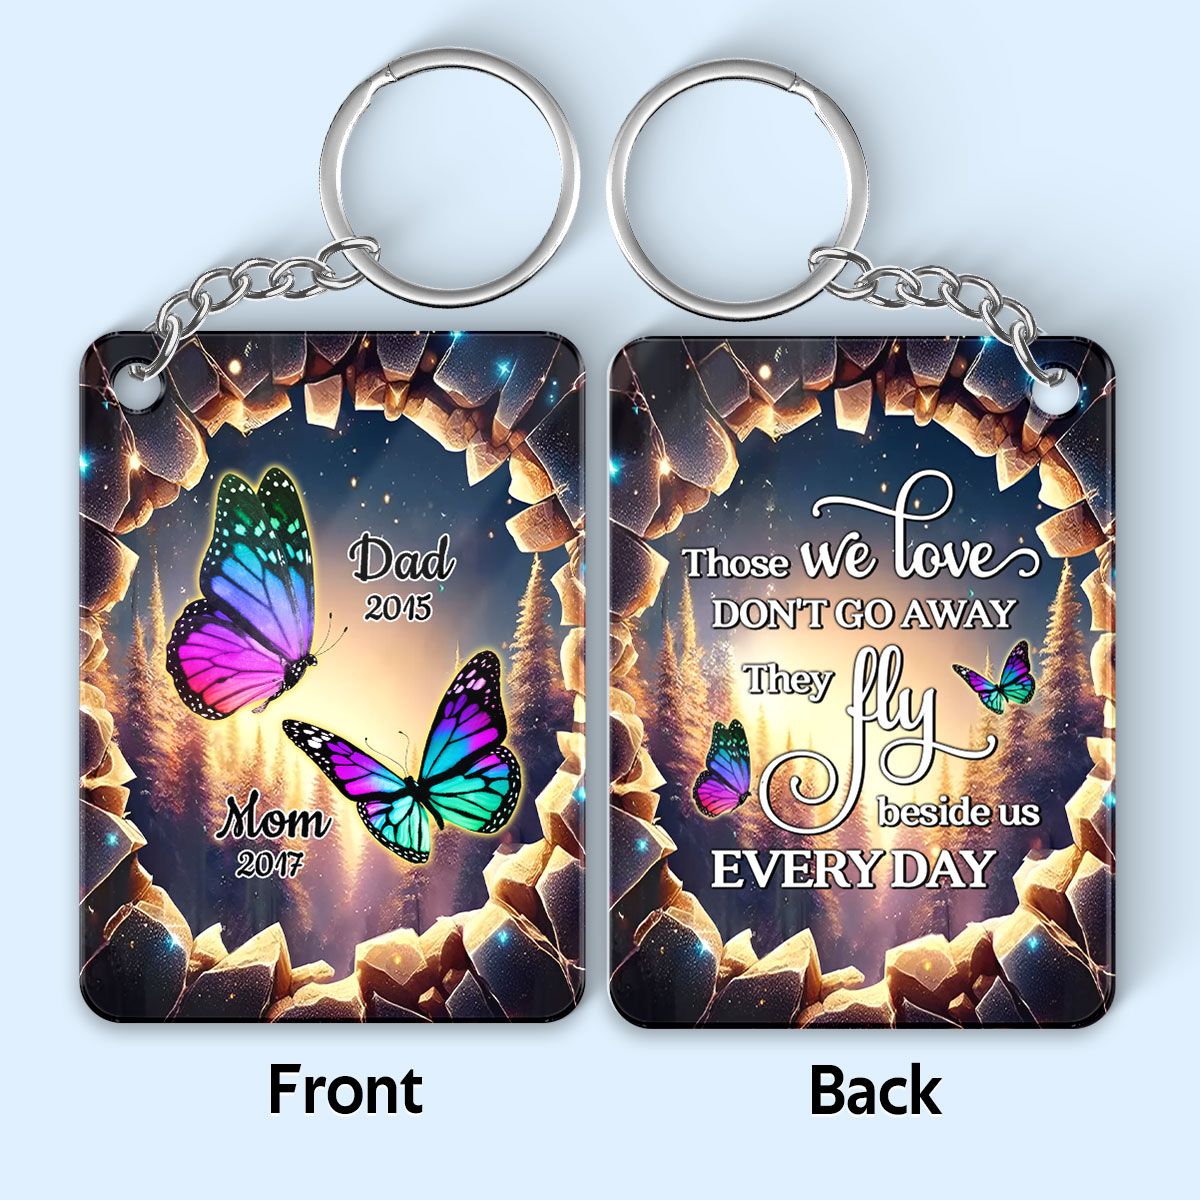 Family Butterflies 3D Hole Memorial Sympathy Gift Remembrance Keepsake Personalized Acrylic Keychain